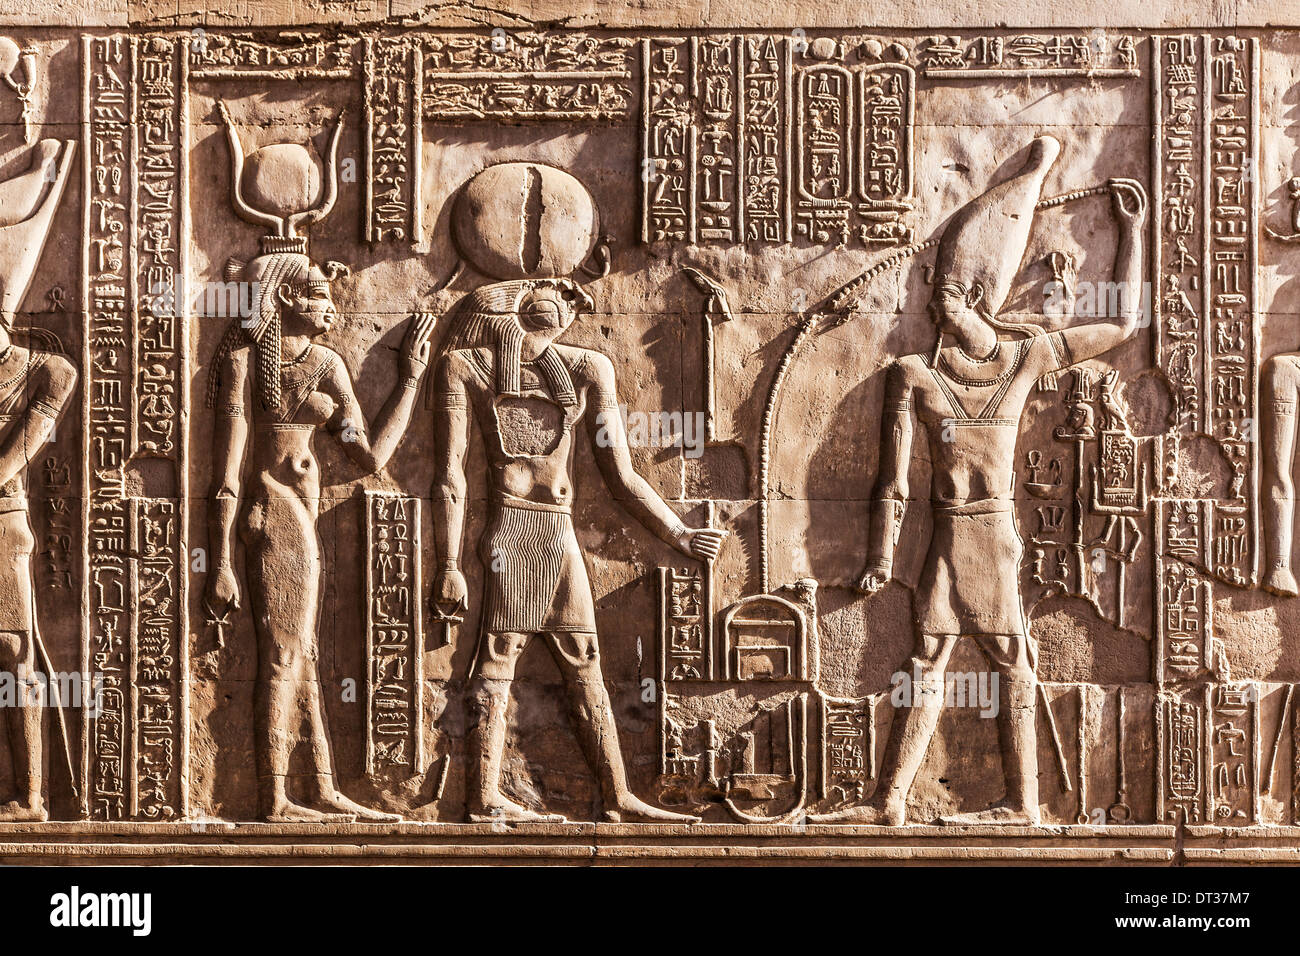 Bas relief carvings on a wall of the Ancient Egyptian Temple at Kom Ombo  Stock Photo - Alamy